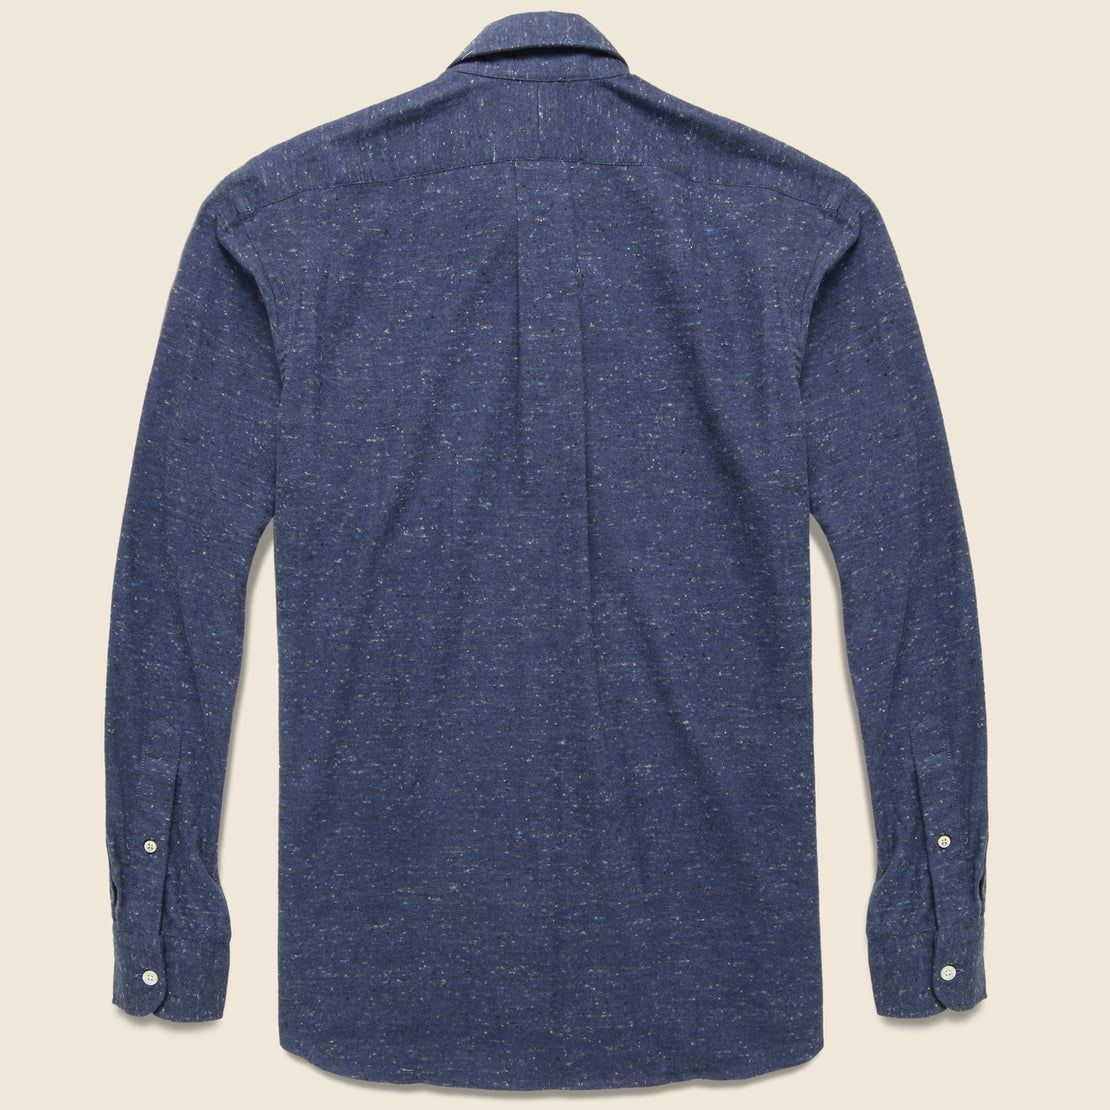 Donegal Twill Shirt - Navy - Hamilton Shirt Co. - STAG Provisions - Tops - L/S Woven - Fleck